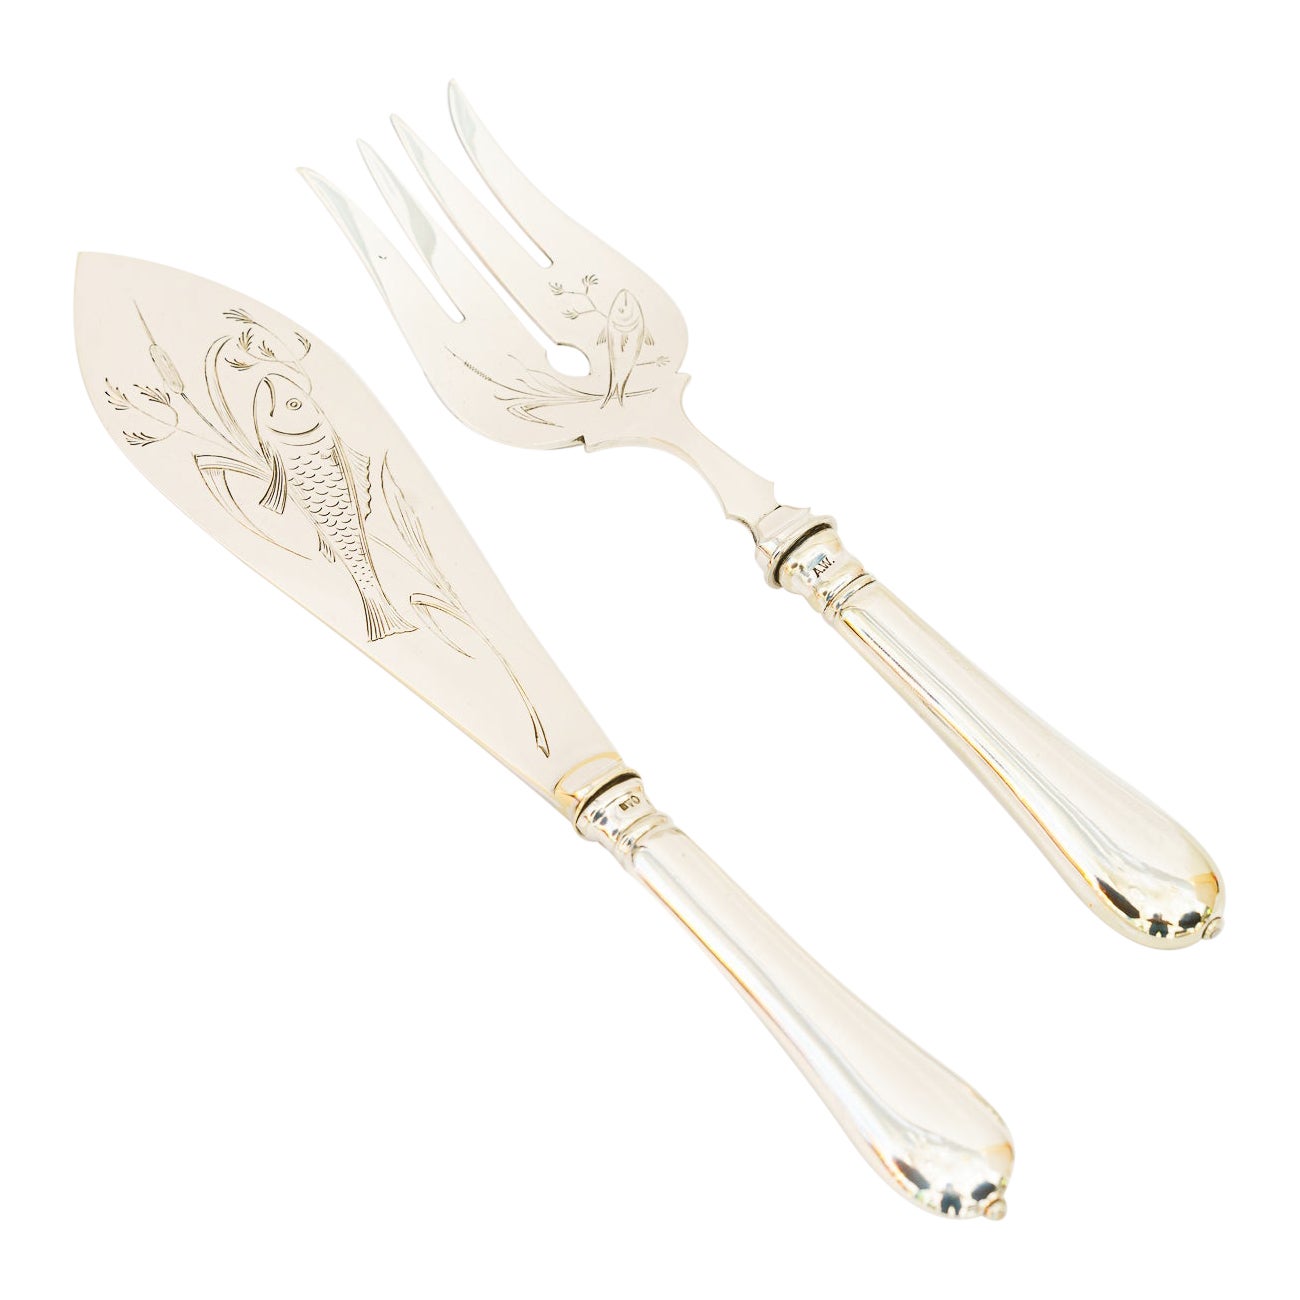  Art deco Silvered Fish Knife and Fork Serving Set vienna around 1920s For Sale